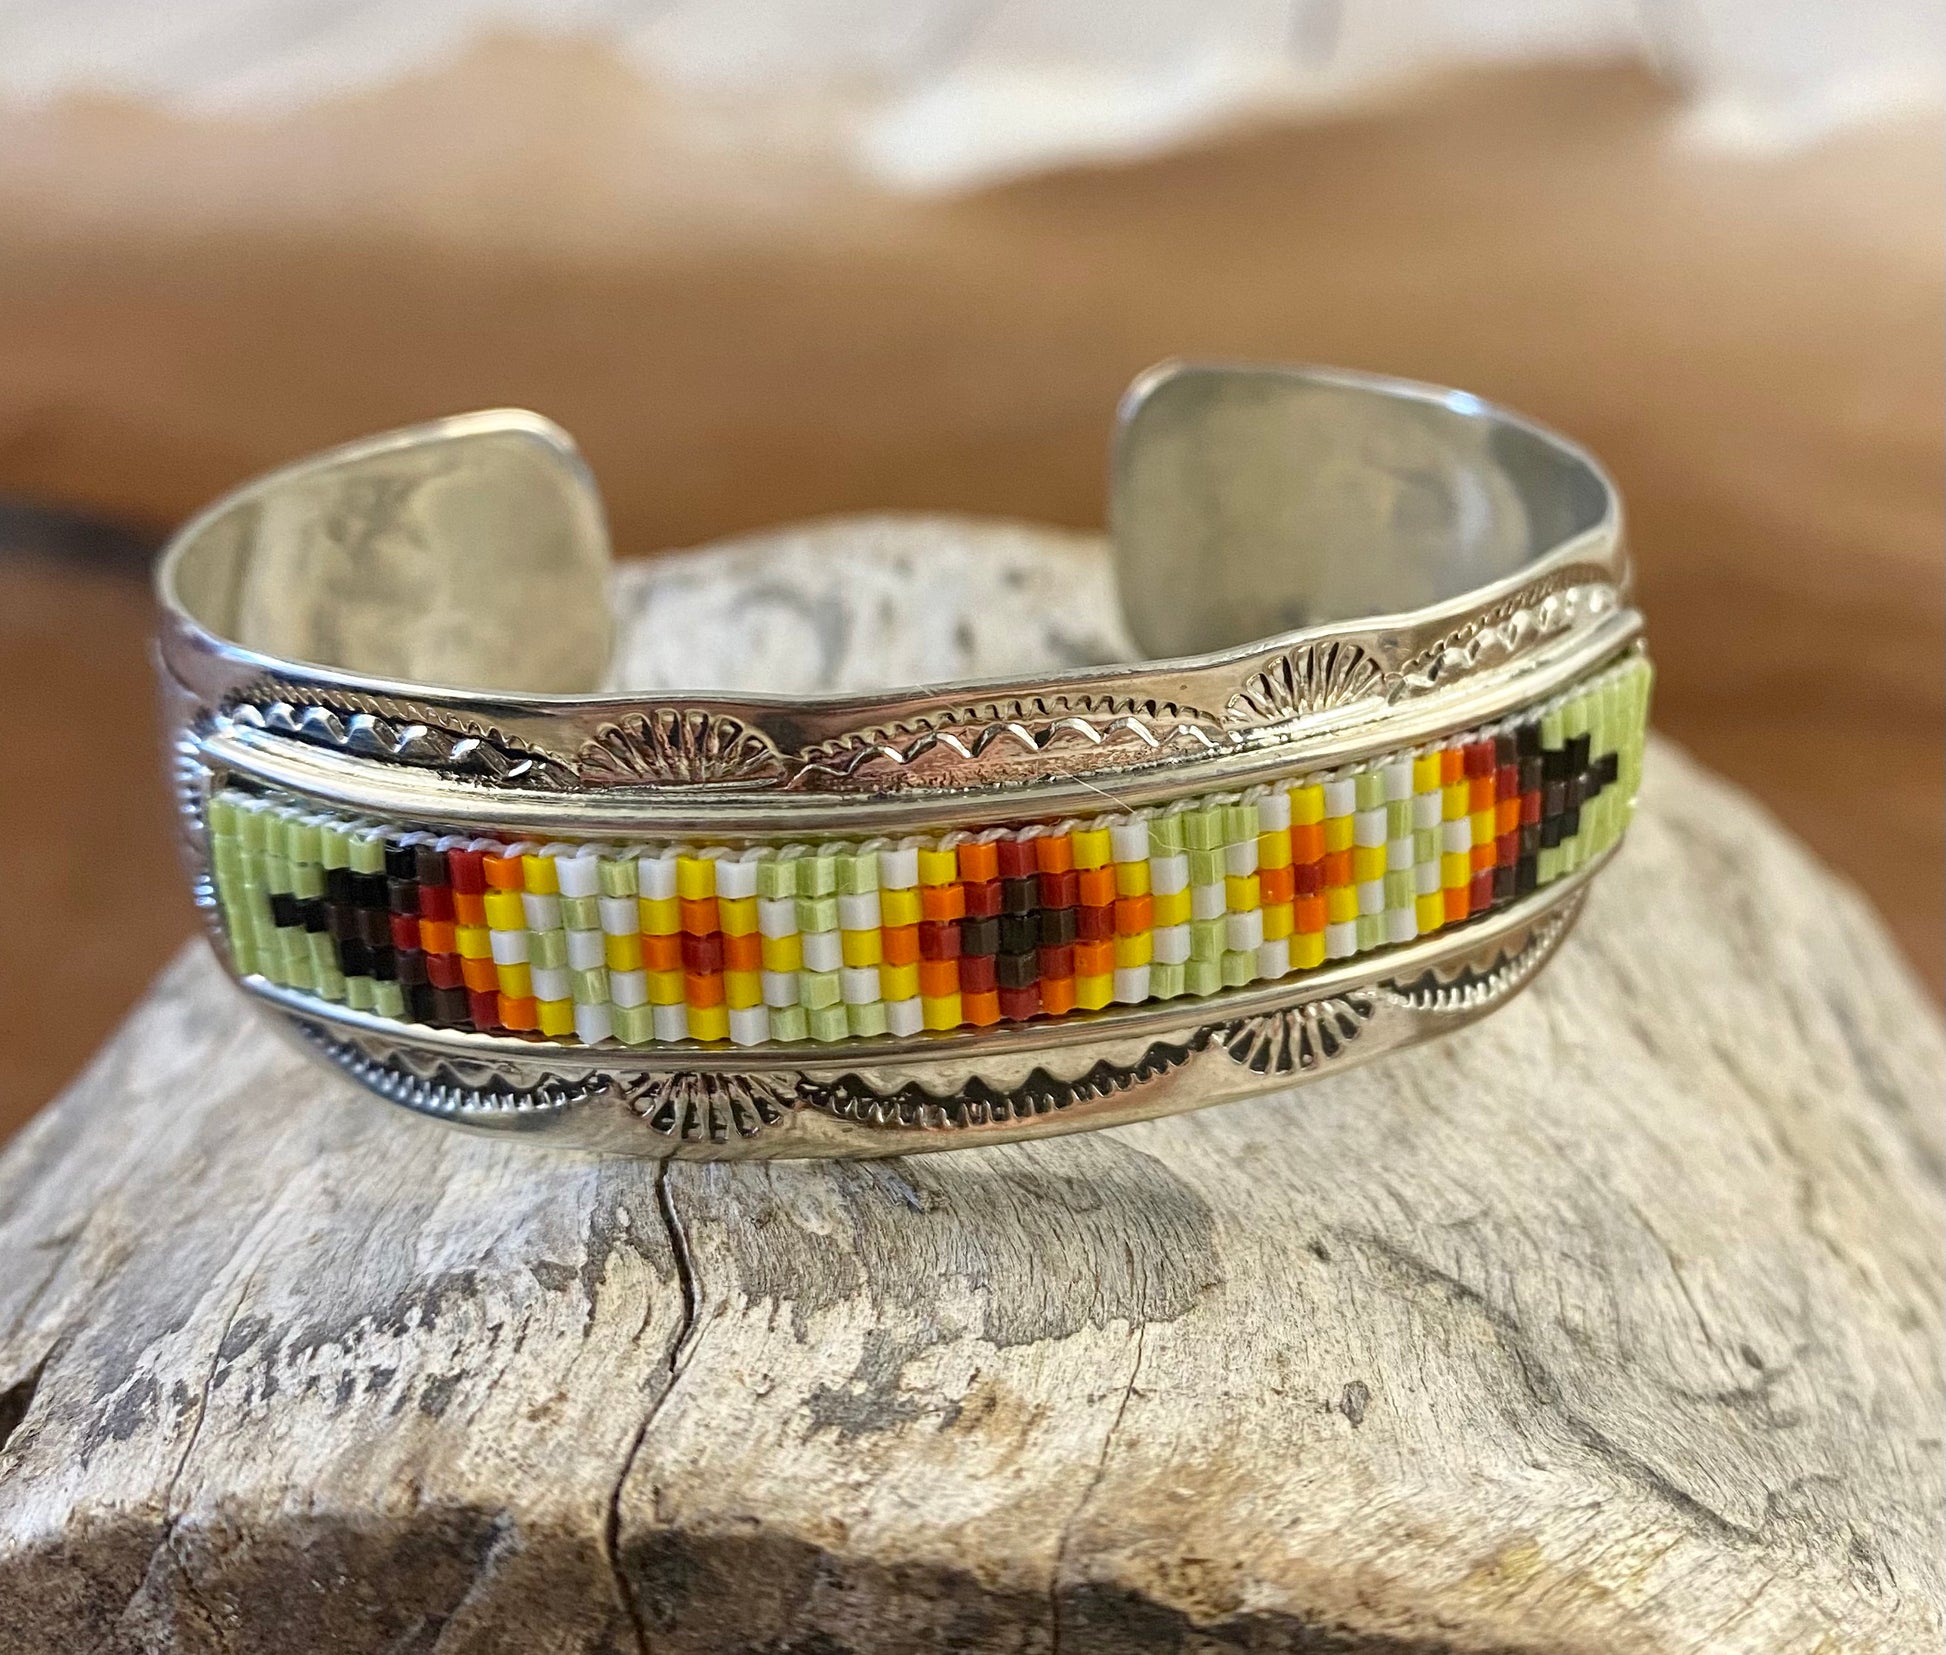 Beautiful unique stamped Nickle sliver and signed by Native American artist silversmith inside of the cuff band. Aztec seed beaded bright colorful Nickle silver cuff bracelet.   Size: 5” inches inside measurement - gap 1-1.5” inches 